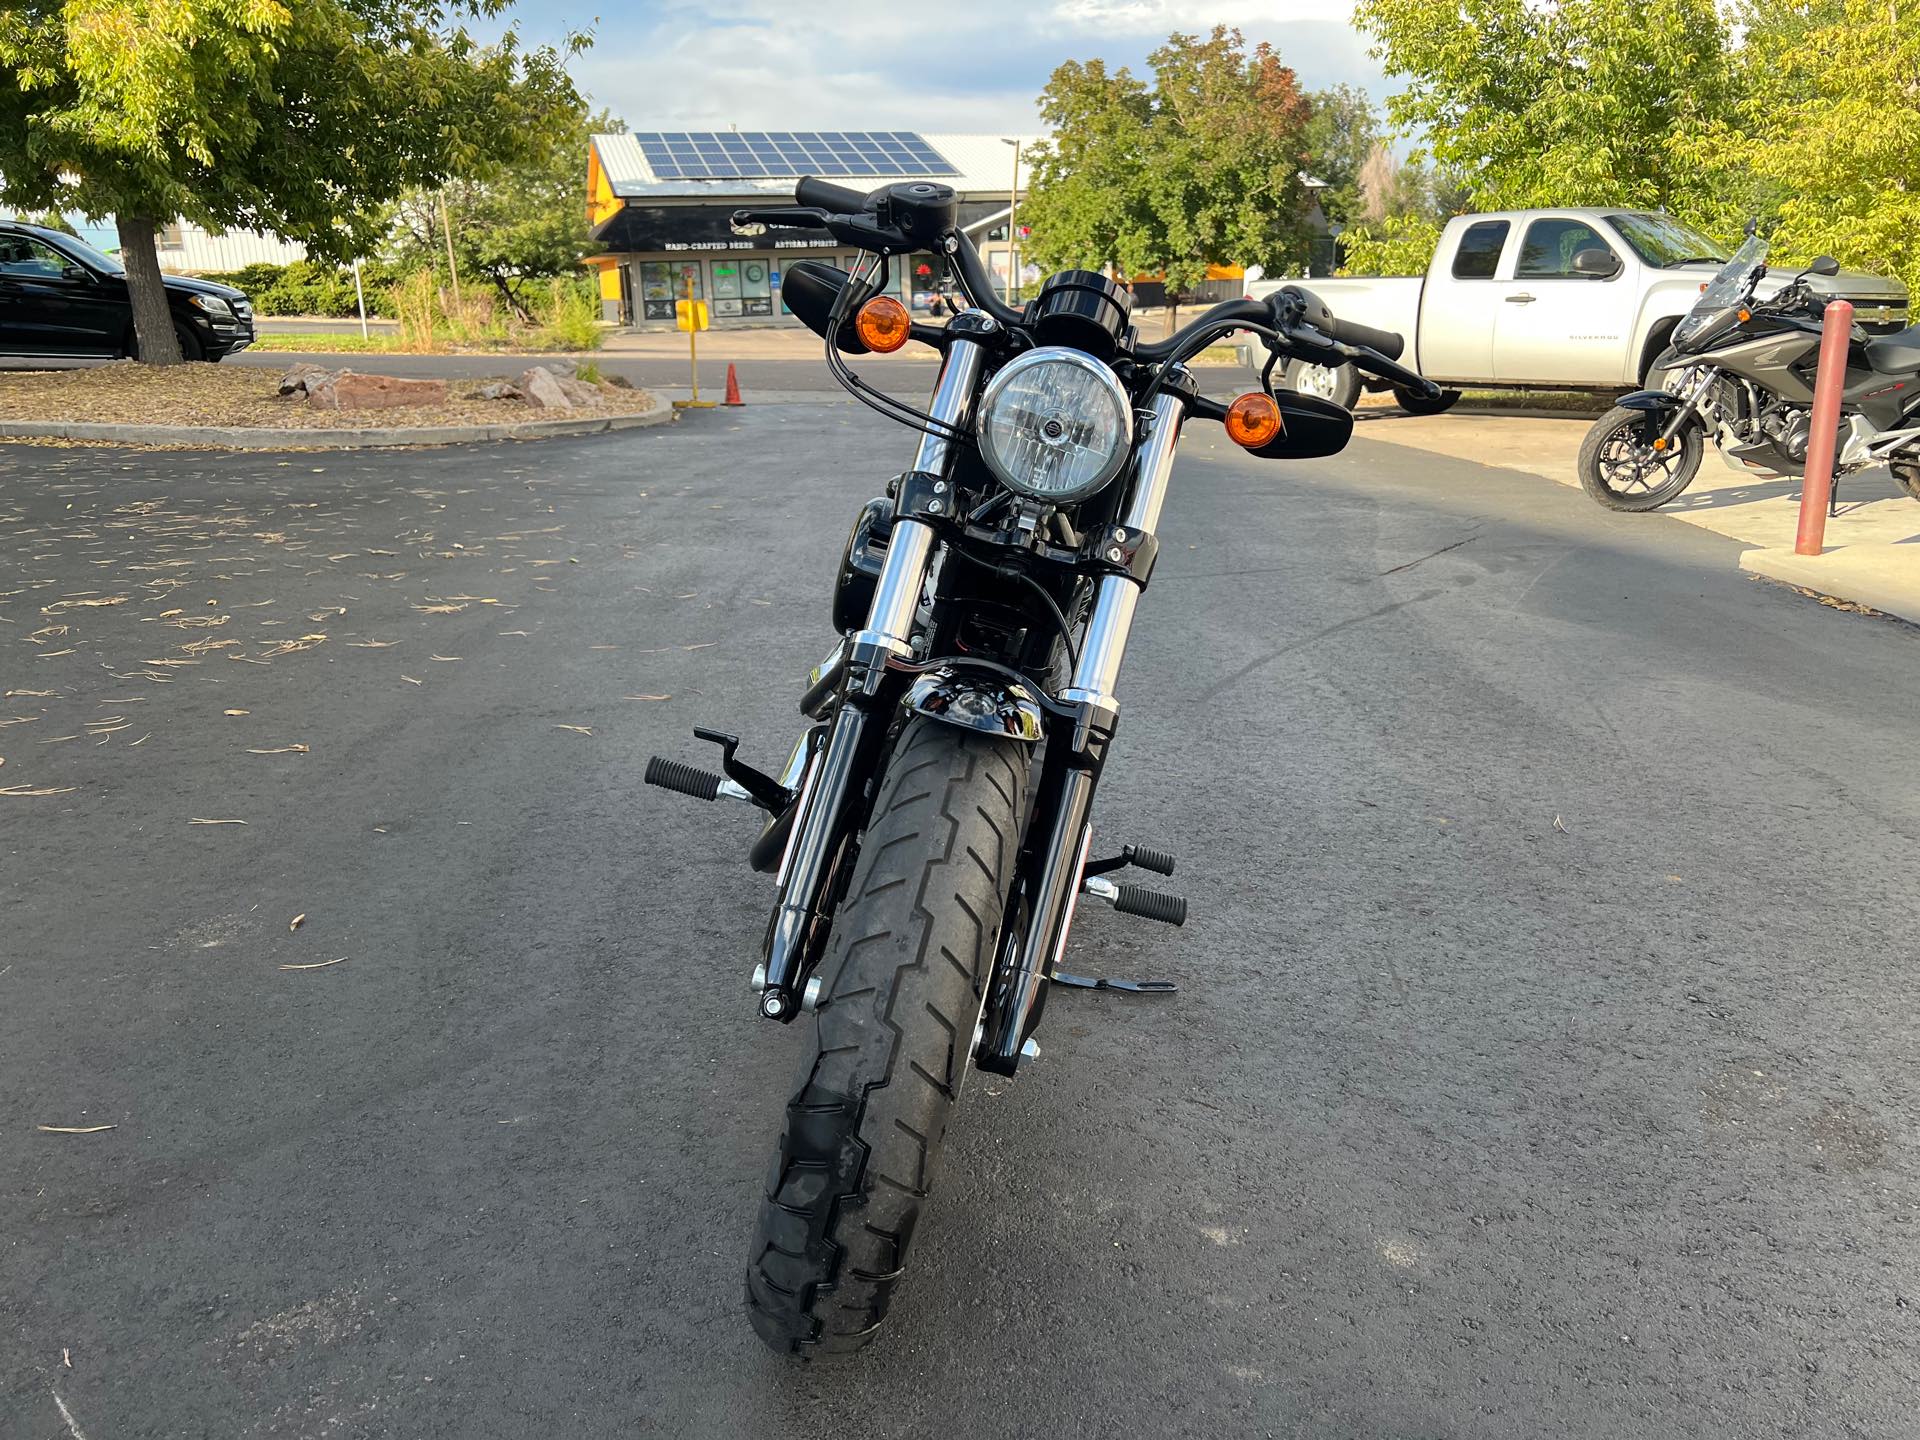 2021 Harley-Davidson Cruiser XL 1200X Forty-Eight at Aces Motorcycles - Fort Collins